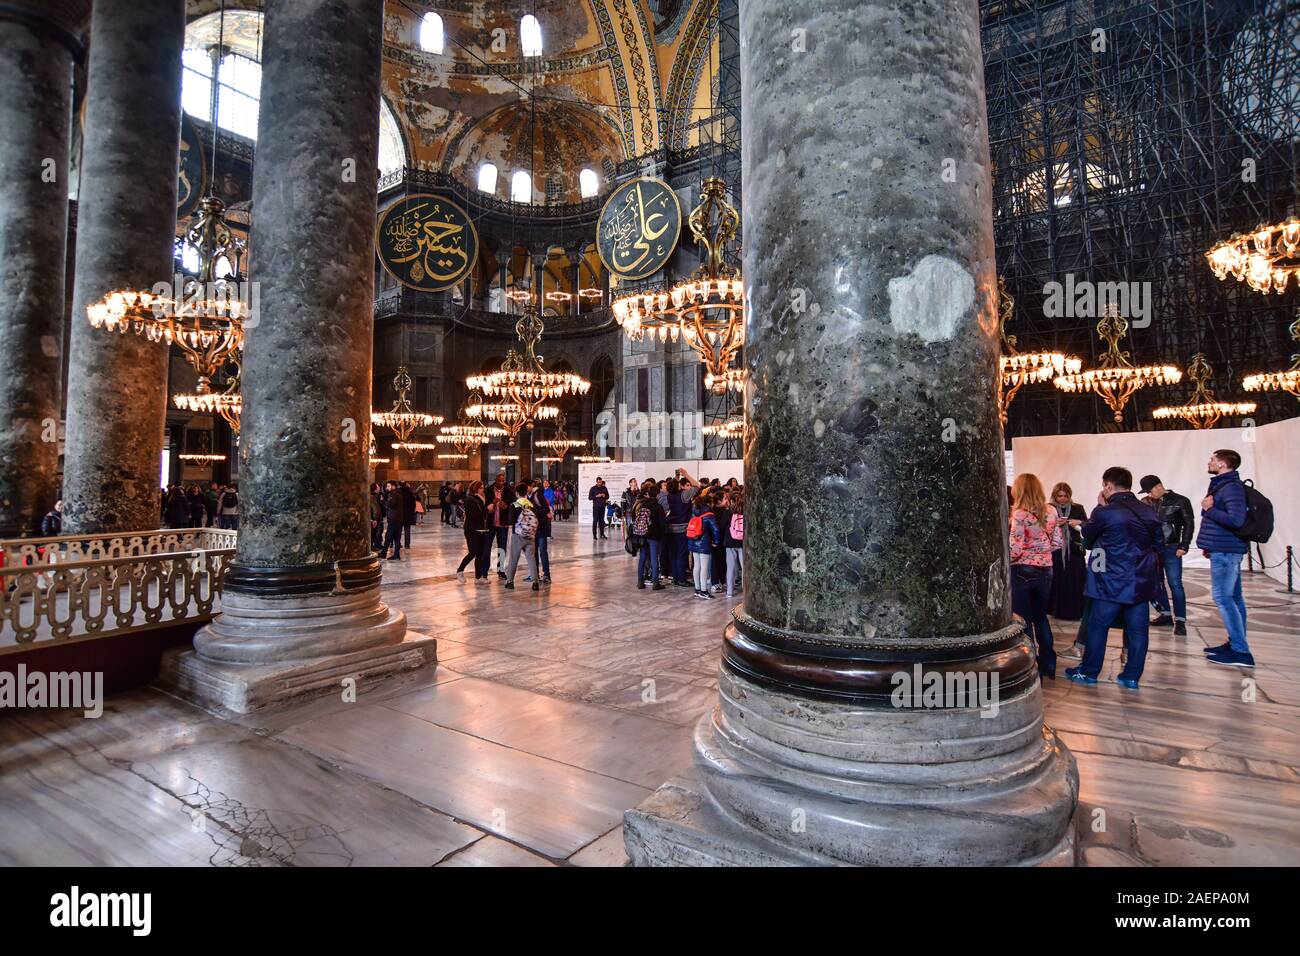 Turkey, Istanbul. Hagia Sophia (Aya Sofia) is a large Christian basilica of Constantinople built in the 4th century, then rebuilt larger in the 6th ce Stock Photo